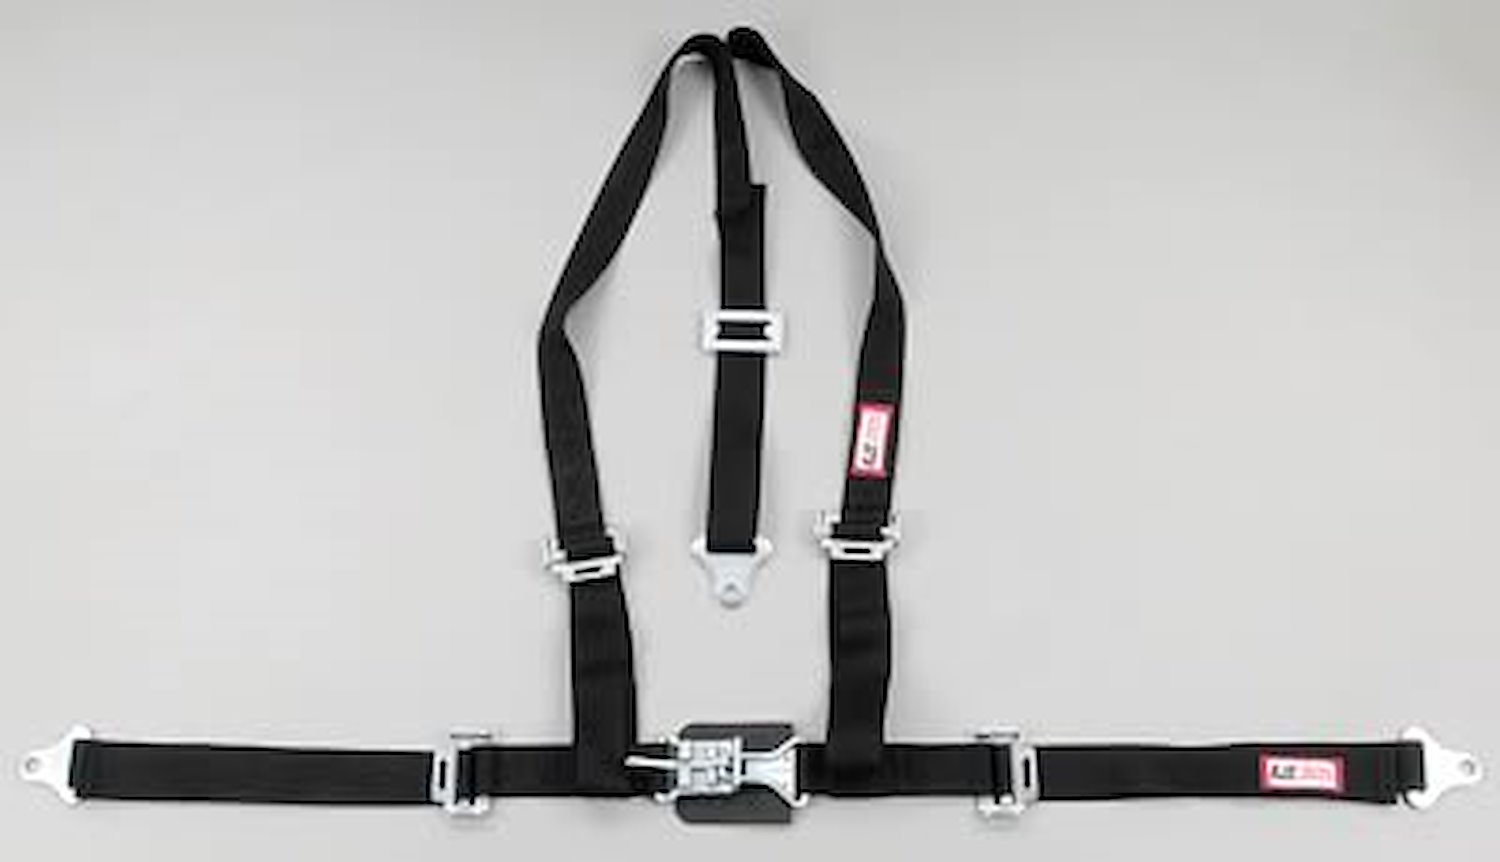 NON-SFI L&L HARNESS 2 PULL DOWN Lap Belt SEWN IN 2 S.H. V ROLL BAR Mount w/STERNUM STRAP ALL WRAP ENDS RED